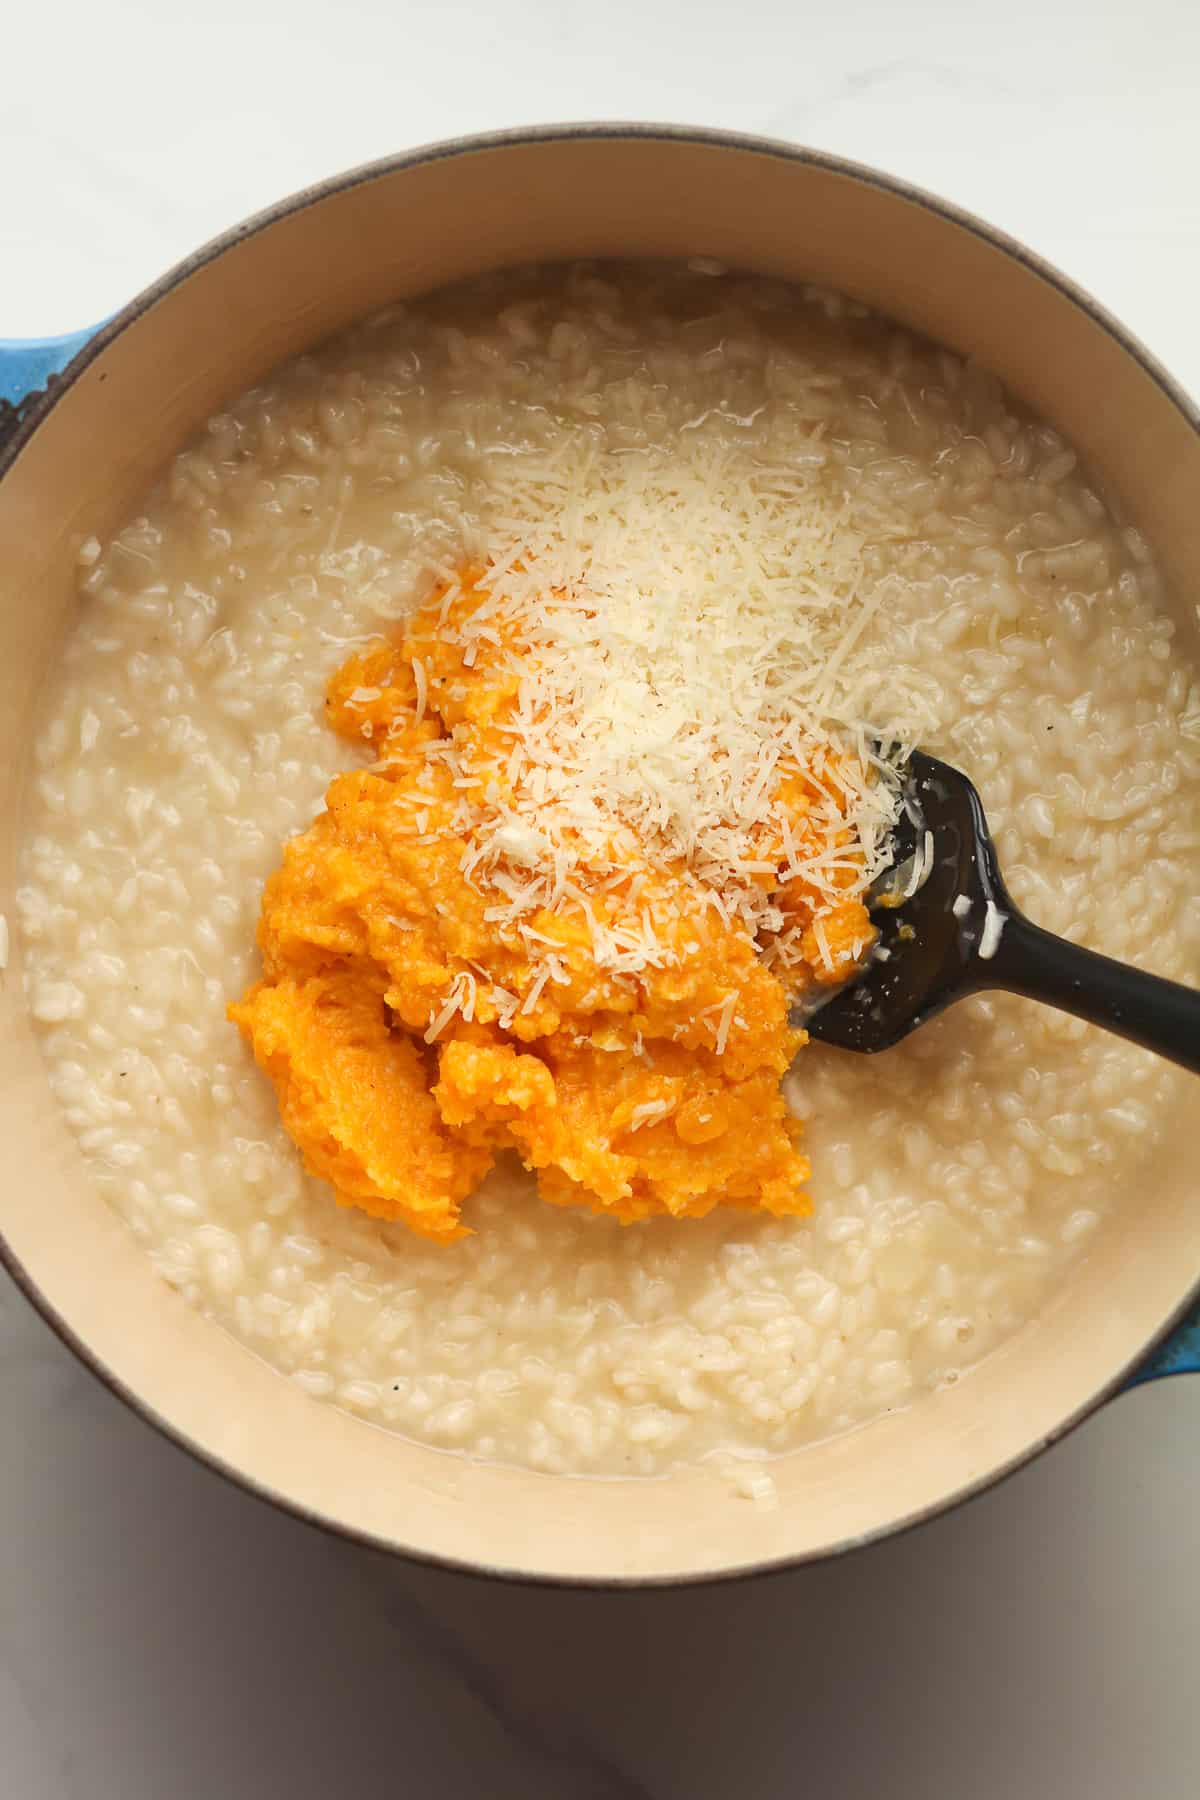 A stockpot of risotto with the pureed squash on top.